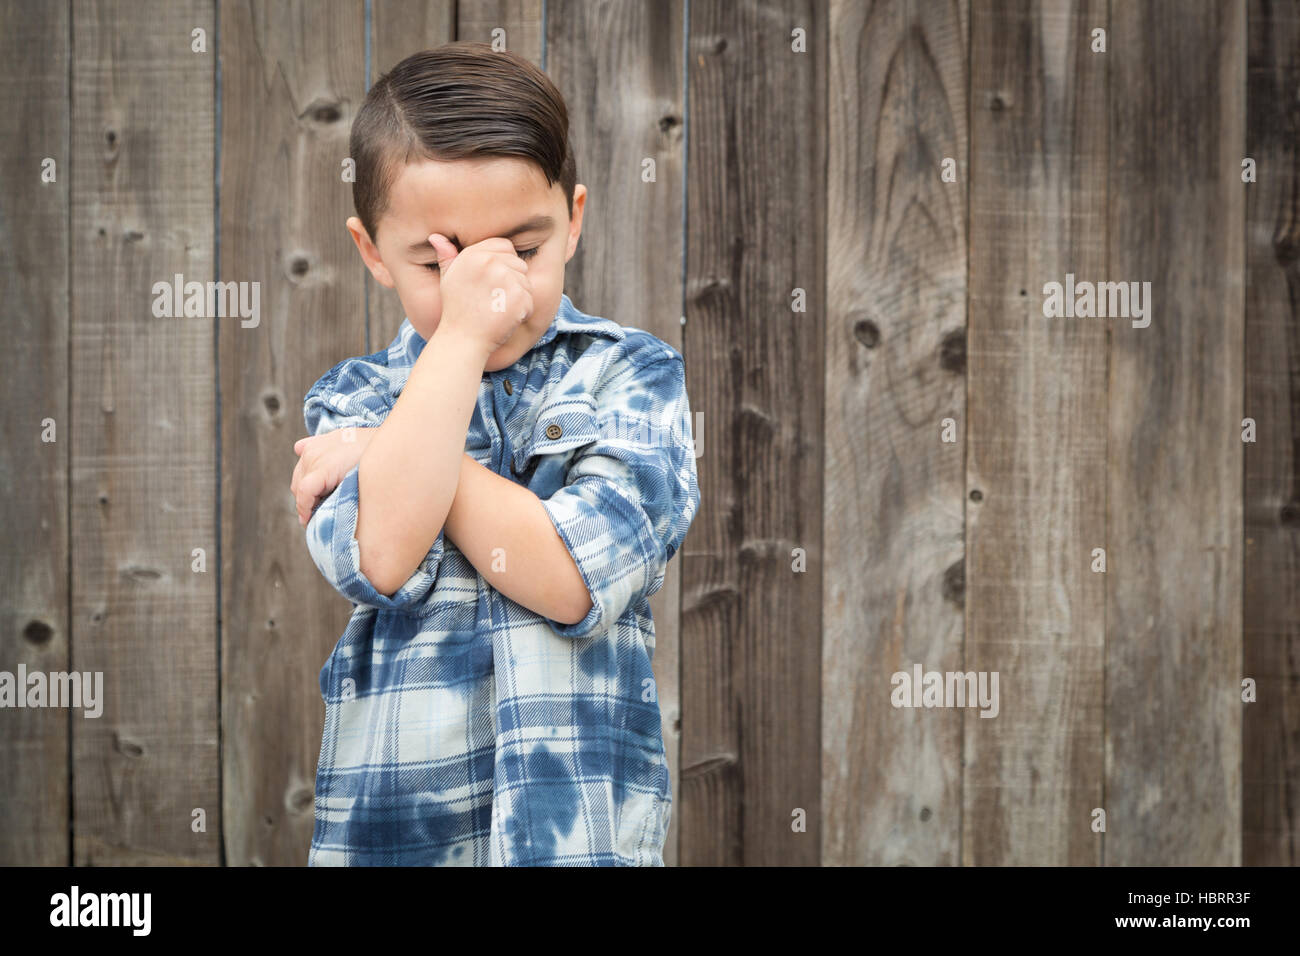 Young Frustrated Mixed Race Boy With Hand on Face Against Wooden Fence. Stock Photo